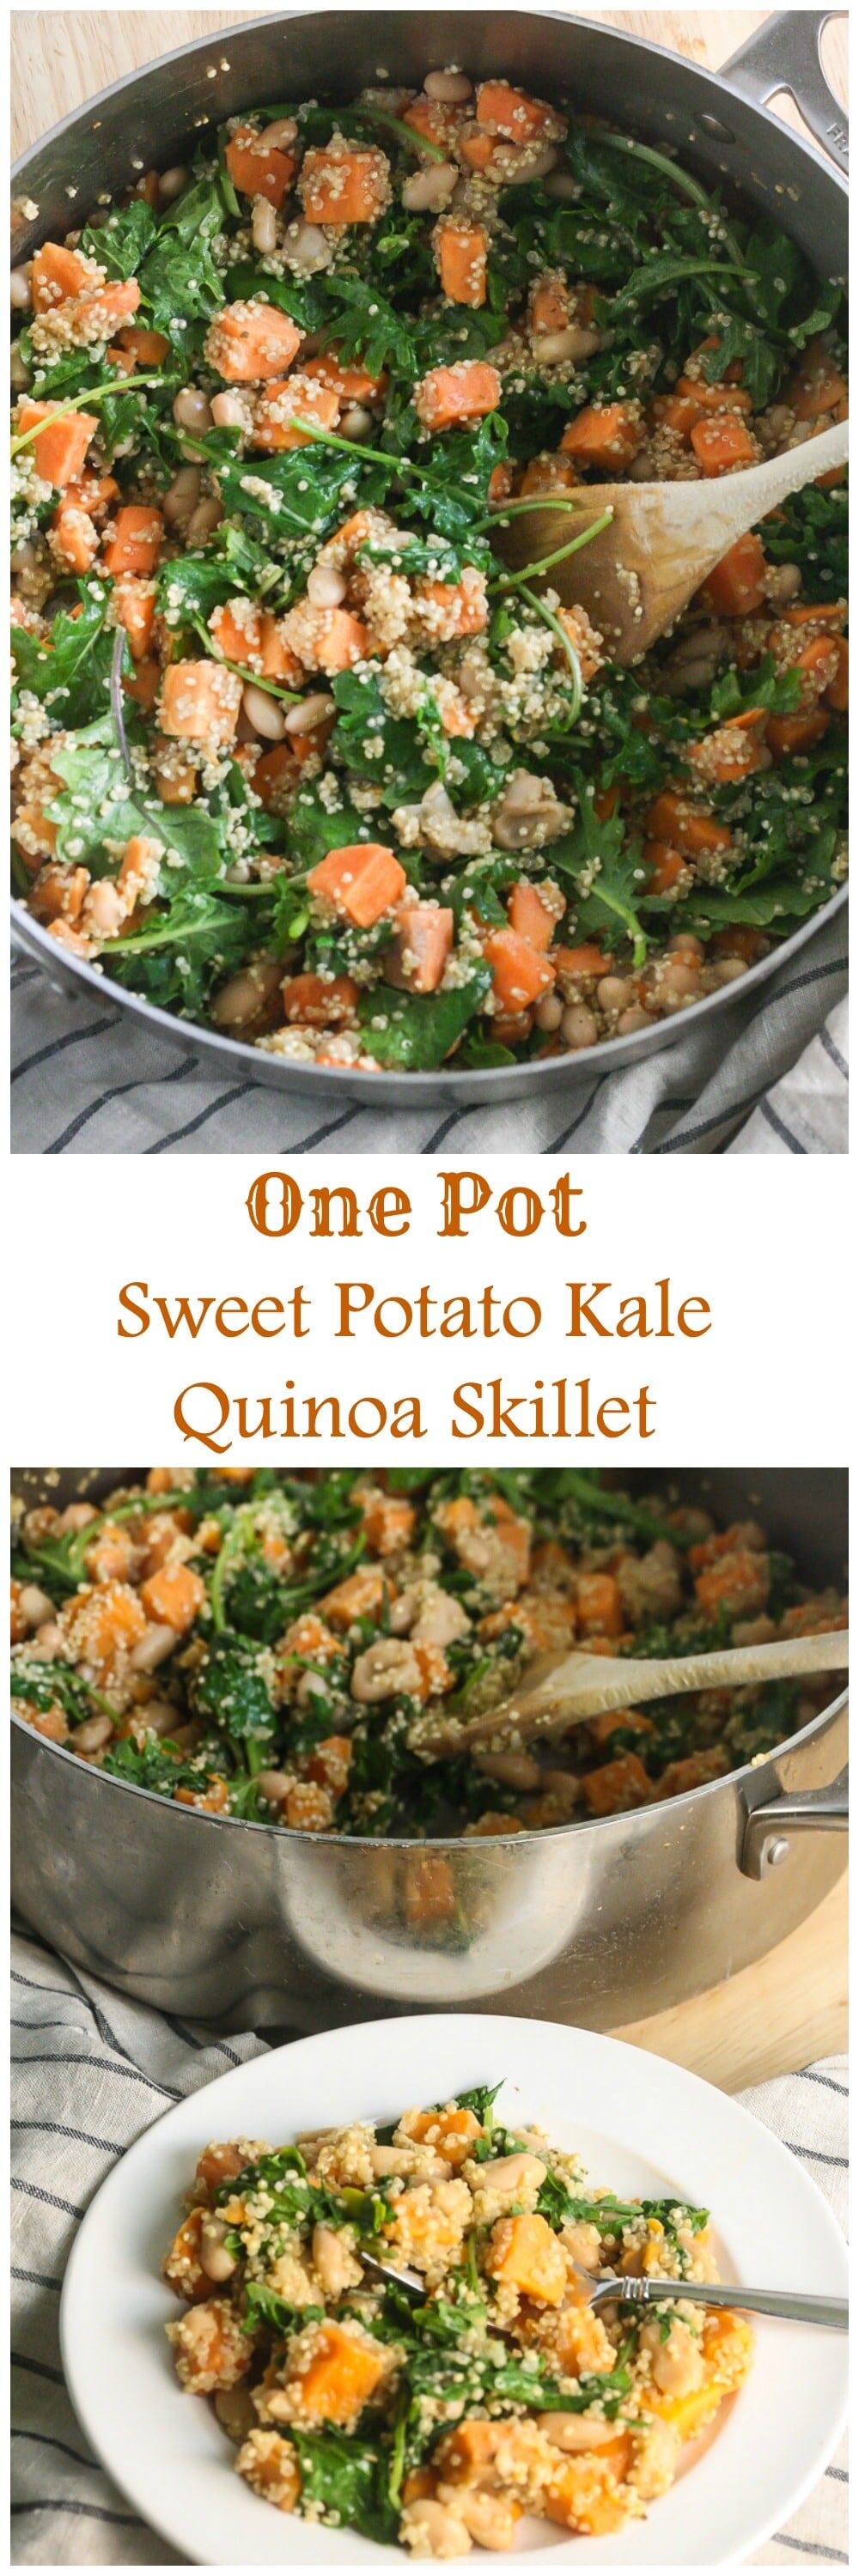 One Pot Sweet Potato Kale Quinoa Skillet that will be ready in under 30 minutes from Lauren Kelly Nutrition.